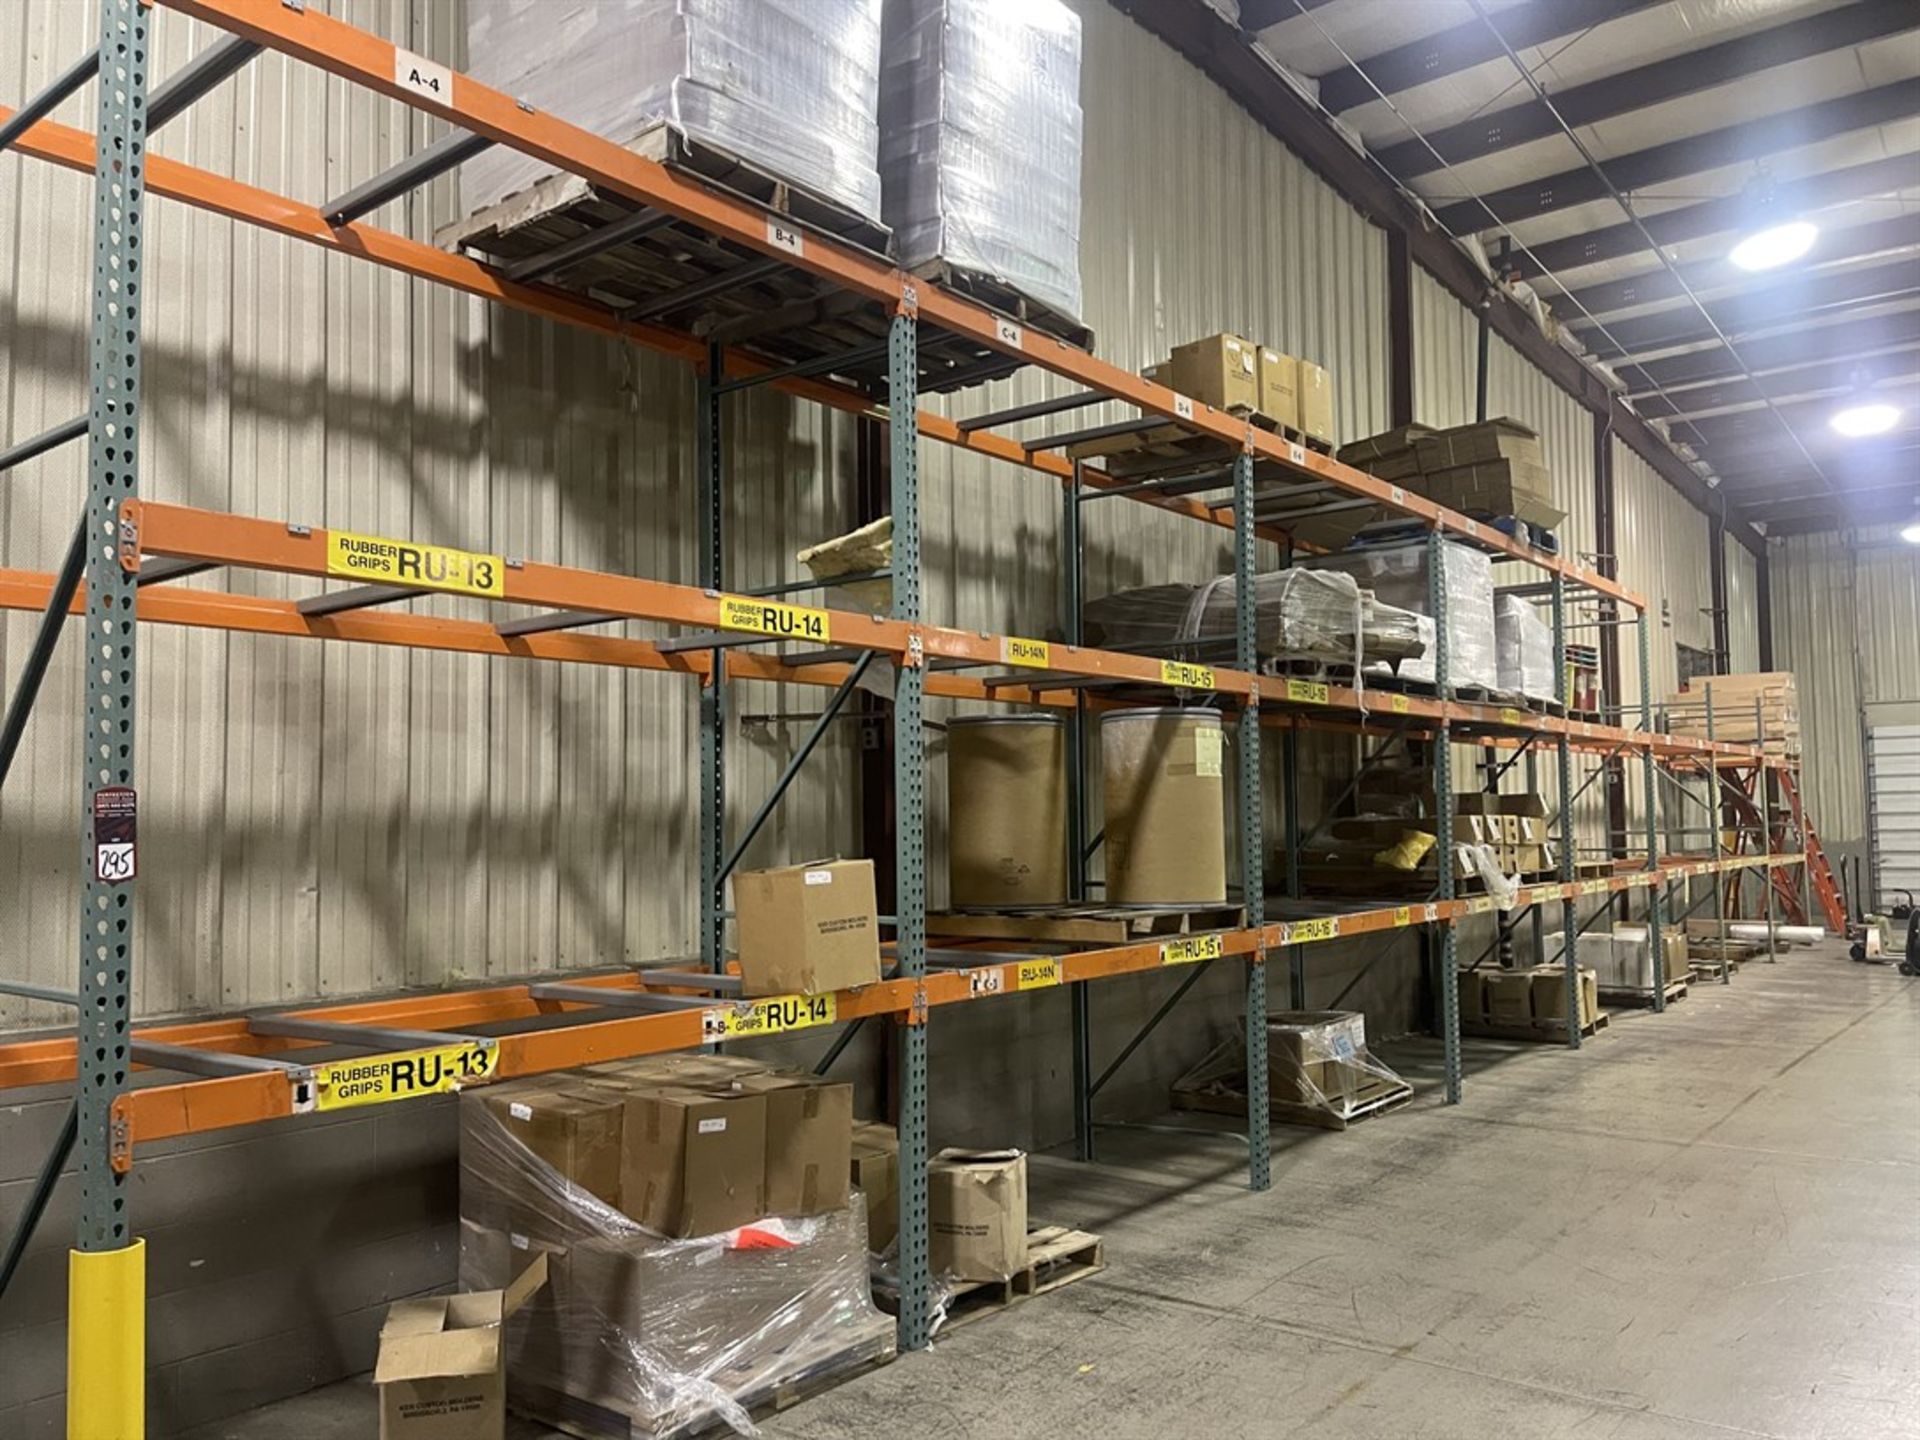 Lot of (8) Sections of Pallet Racking, (6) 12' Uprights, (3) 10' Uprights, 8' Crossbeams, 42" Deep